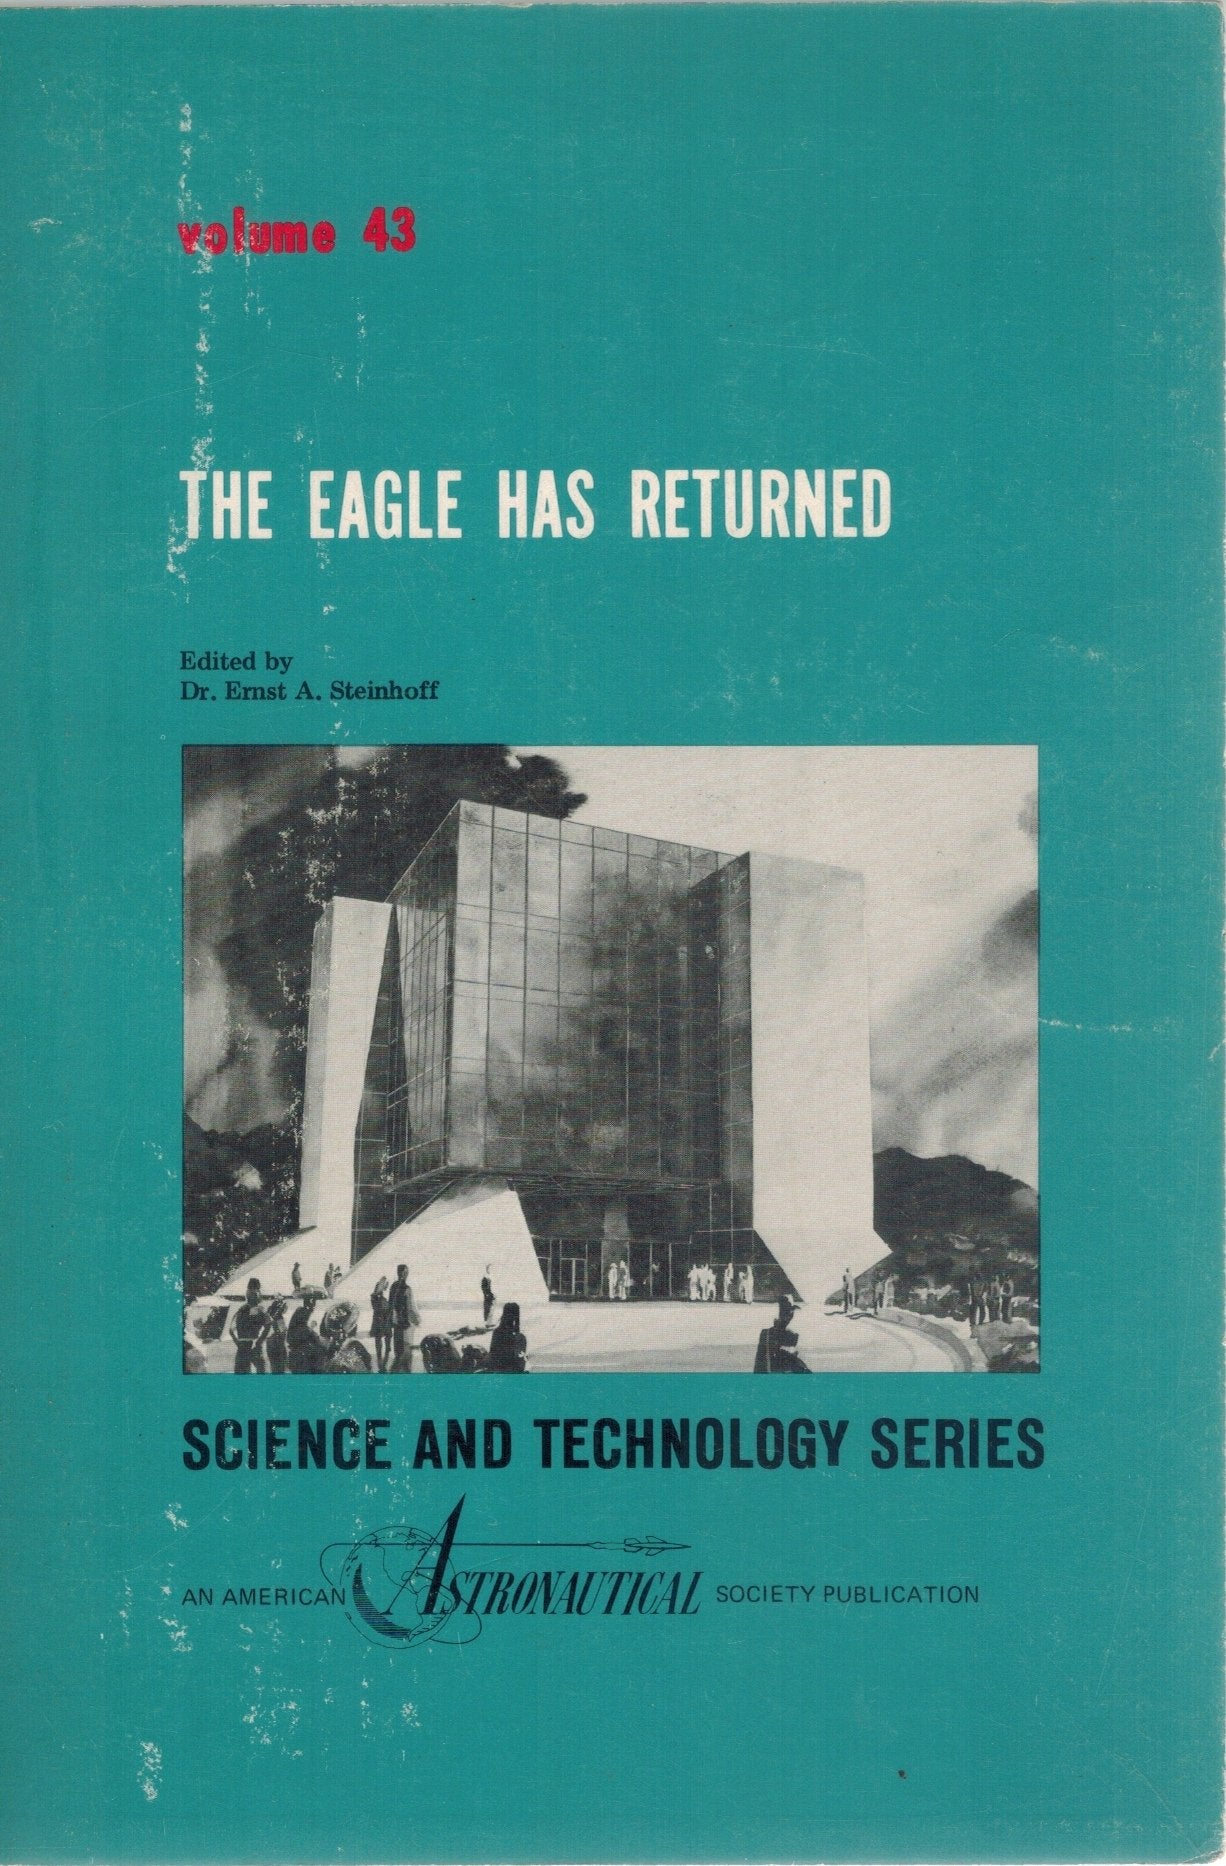 THE EAGLE HAS RETURNED International Space Hall of Fame Dedication  Conference, Oct. 5-9, 1976, Alamogordo, Nm  by Steinhoff, Ernst A.